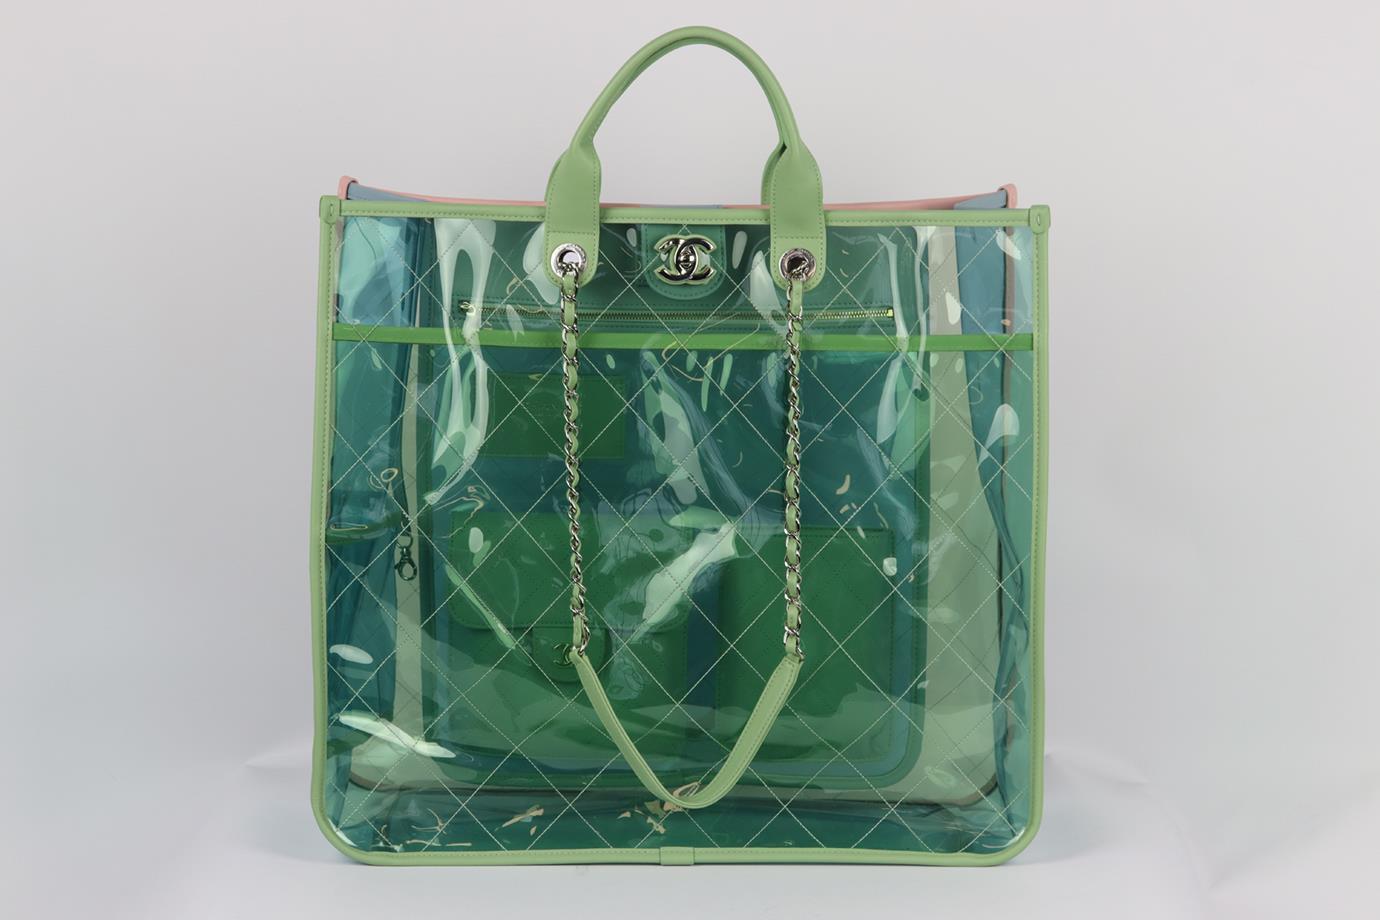 <ul>
<li>Chanel 2018 Coco Splash quilted perspex and leather tote bag.</li>
<li>Made in Italy, this beautiful 2018 ‘Coco Splash’ tote bag has been made from light-green quilted perspex exterior with light-blue leather interior detail, this piece is